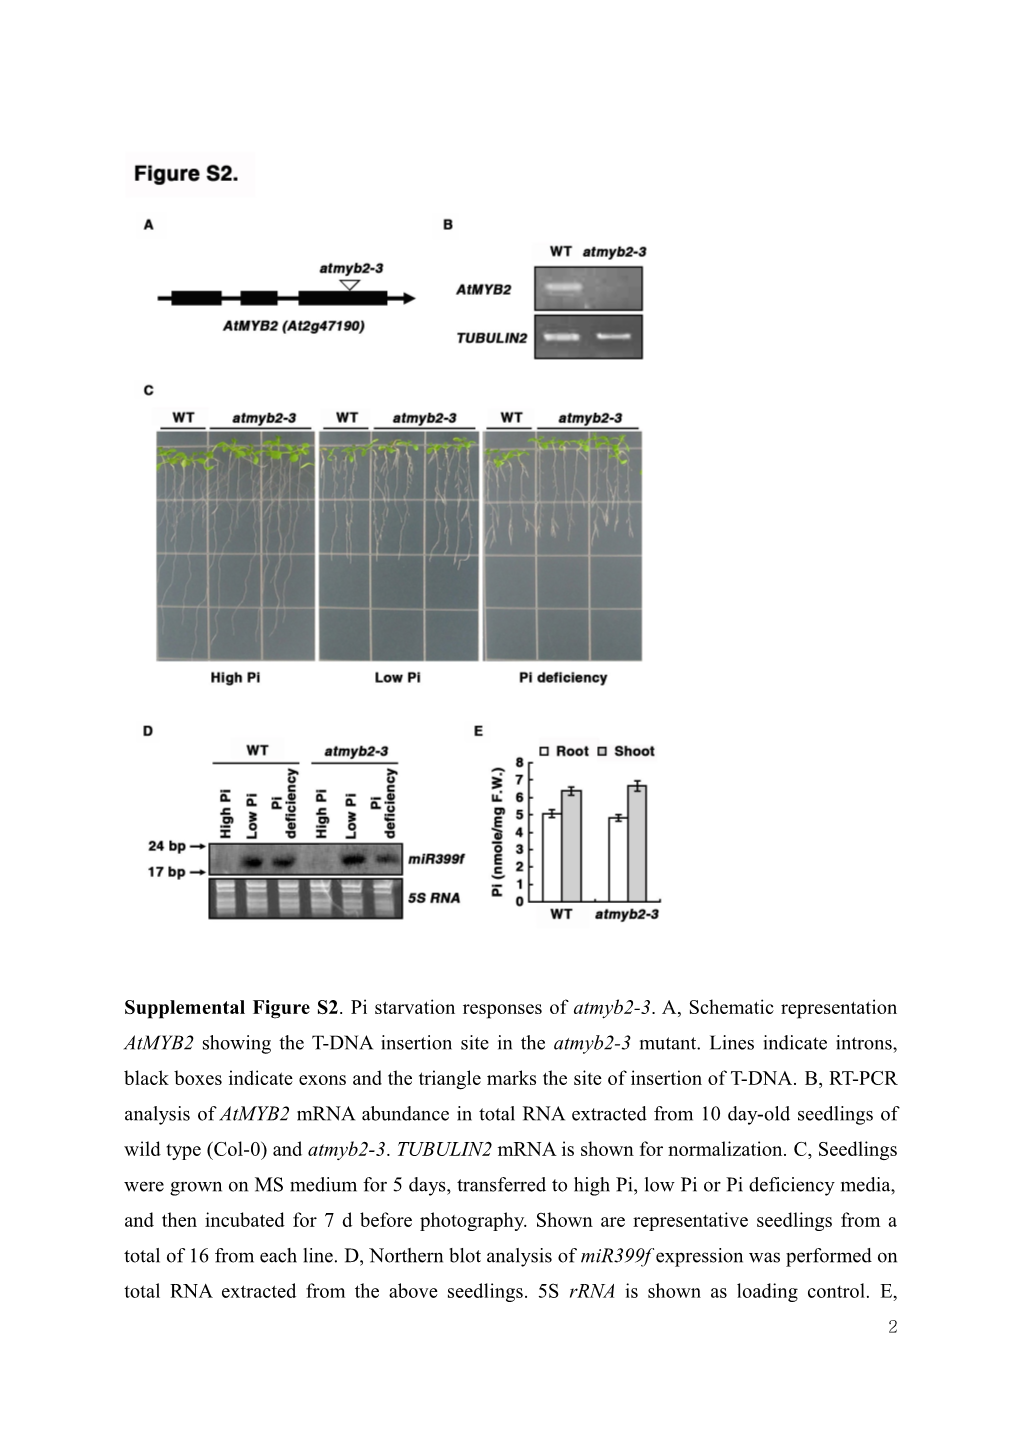 Regulation of Mir399f Transcription by Atmyb2 Affects Phosphate-Starvation Responses In